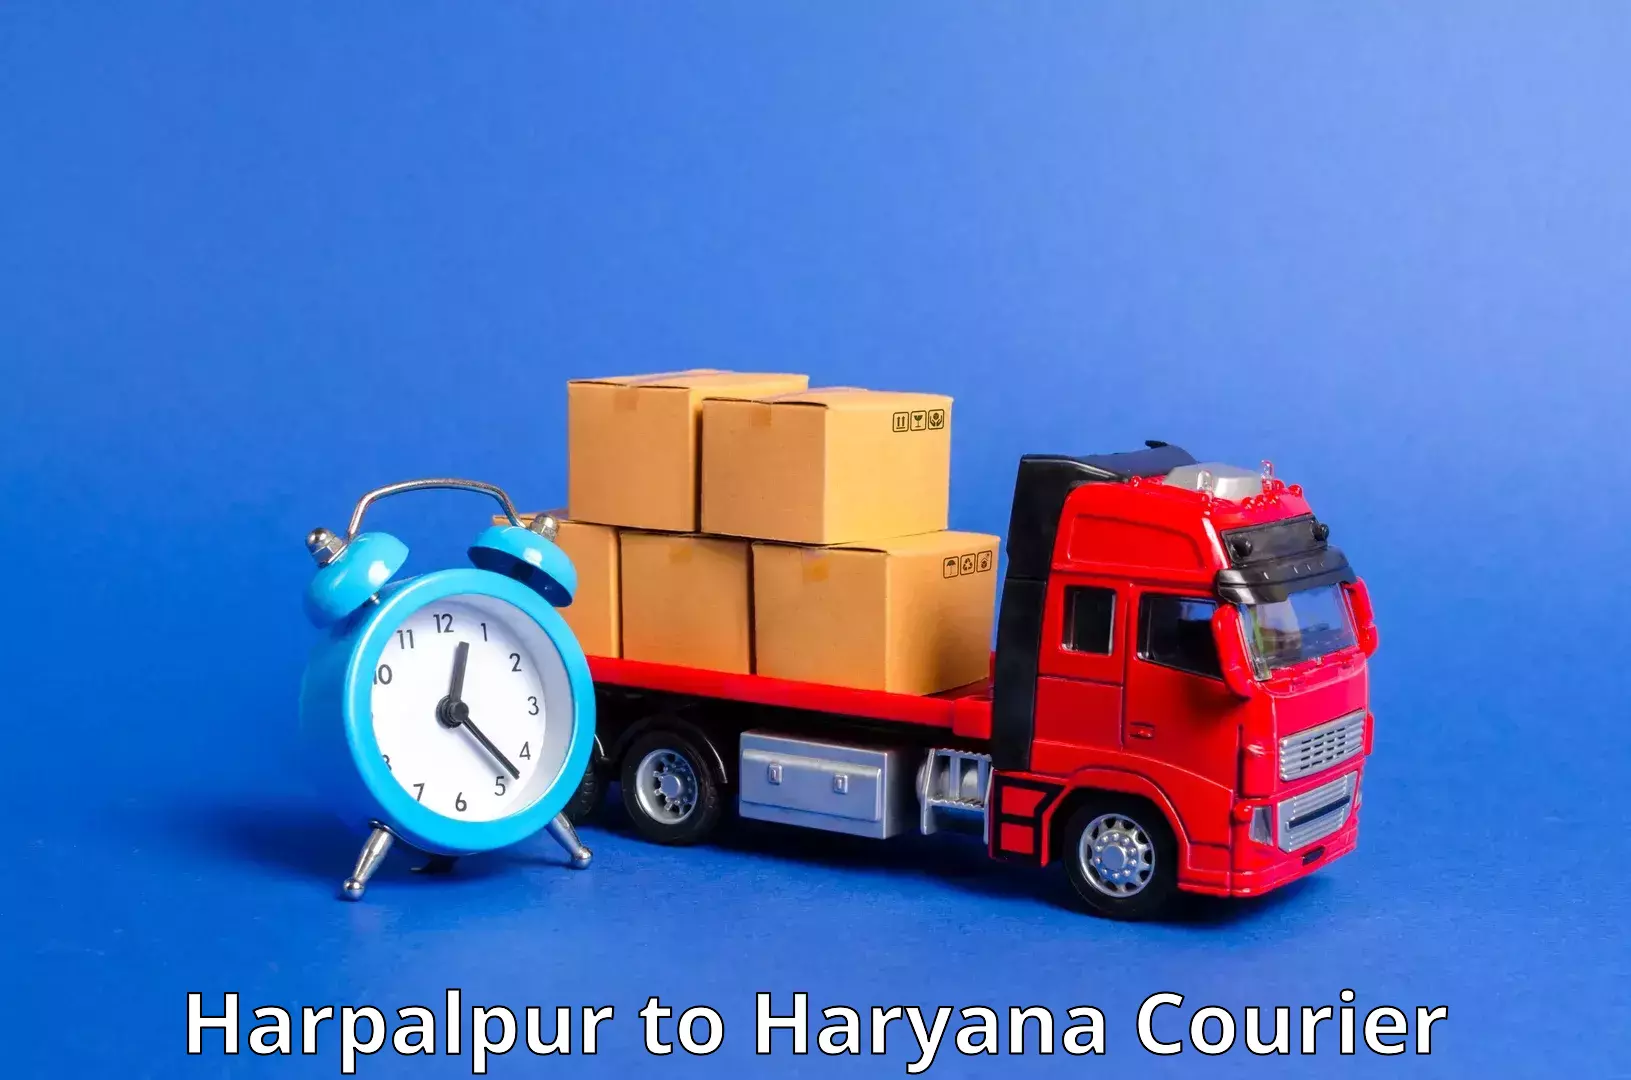 Flexible parcel services Harpalpur to NCR Haryana